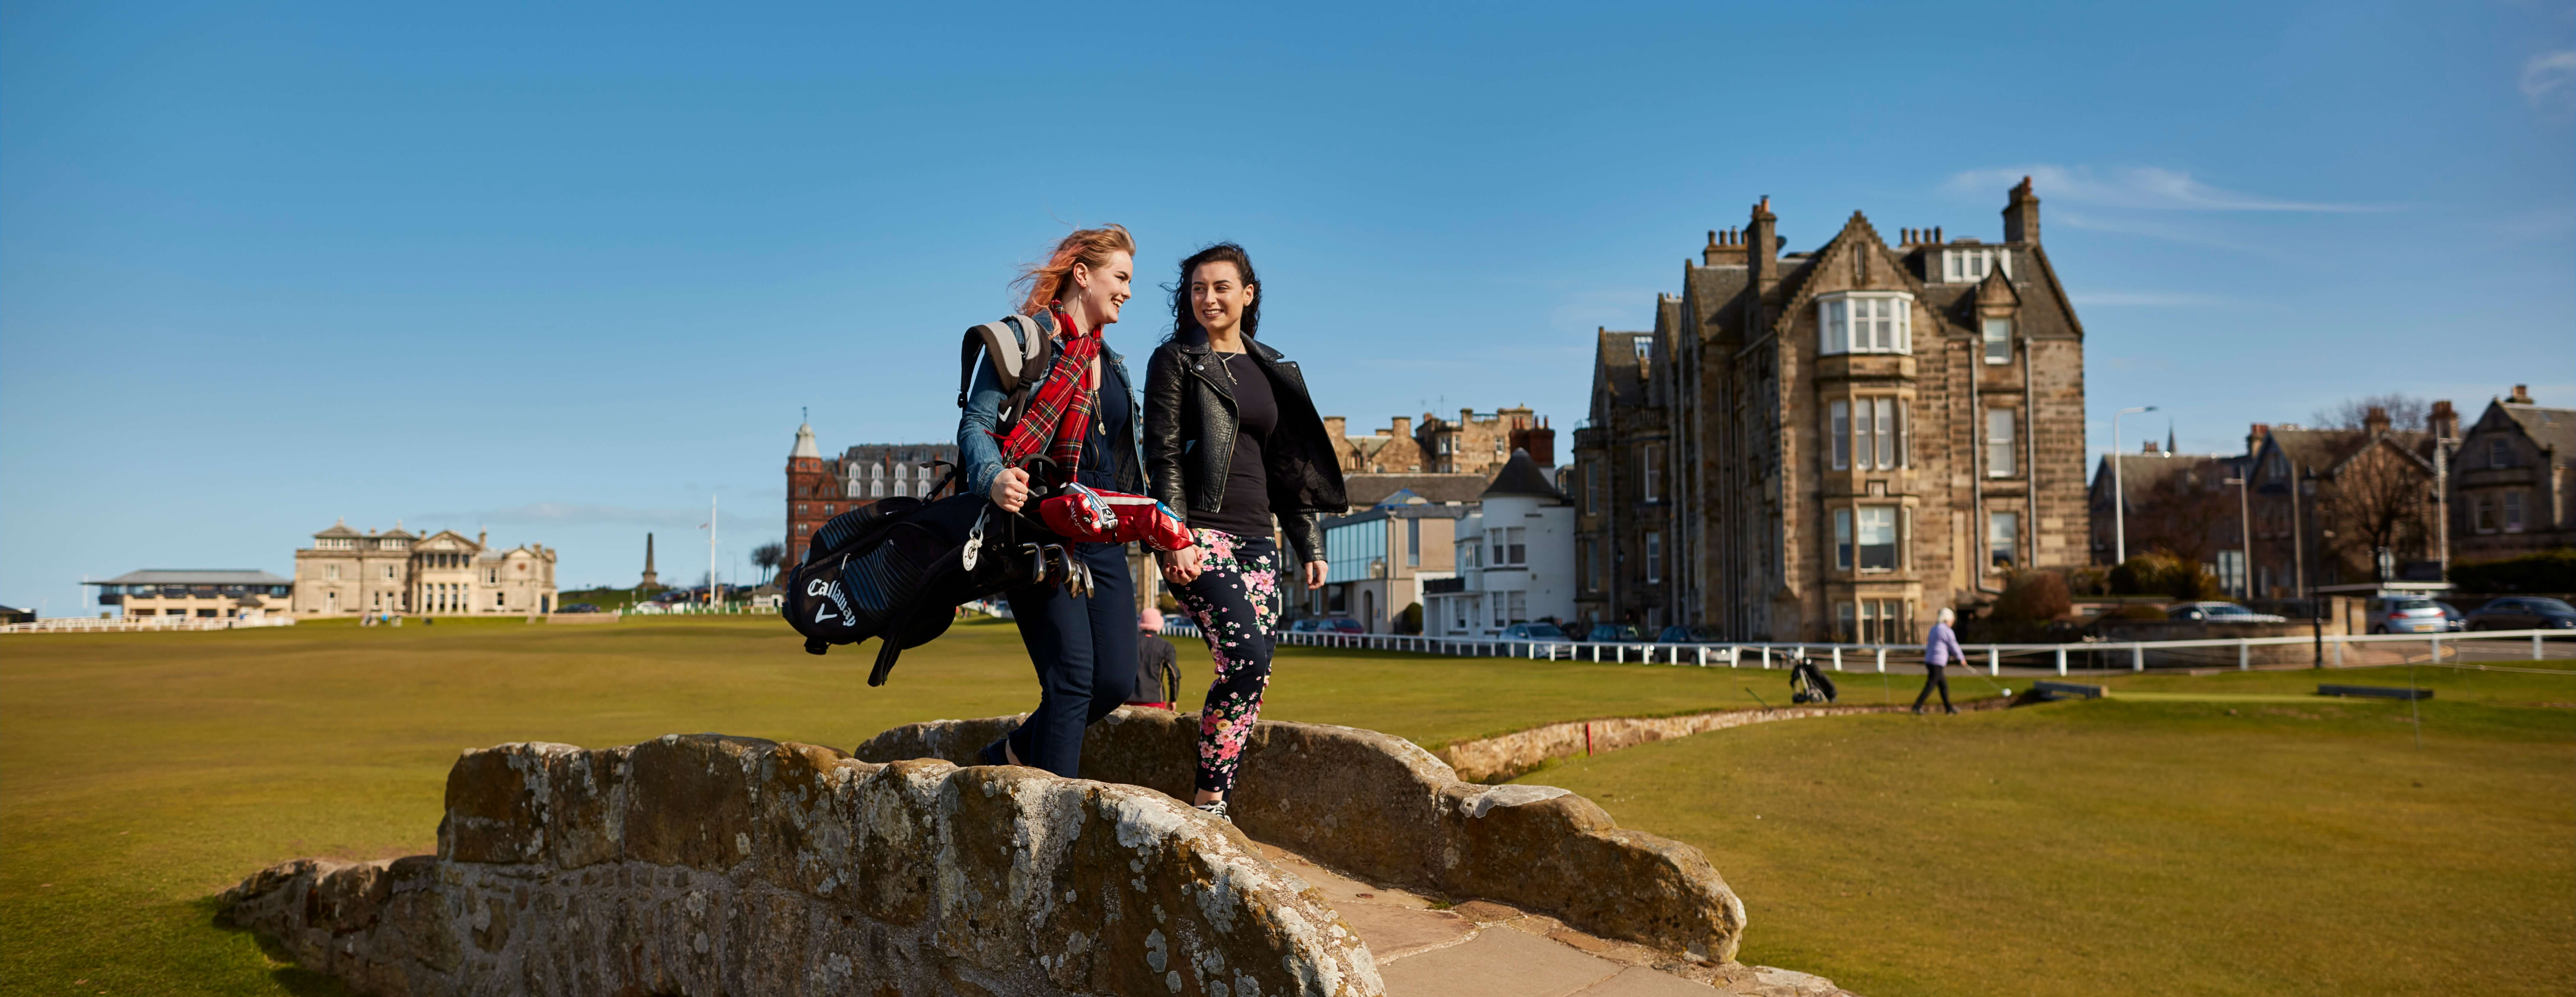 St Andrews – More than just the ‘Home of Golf’